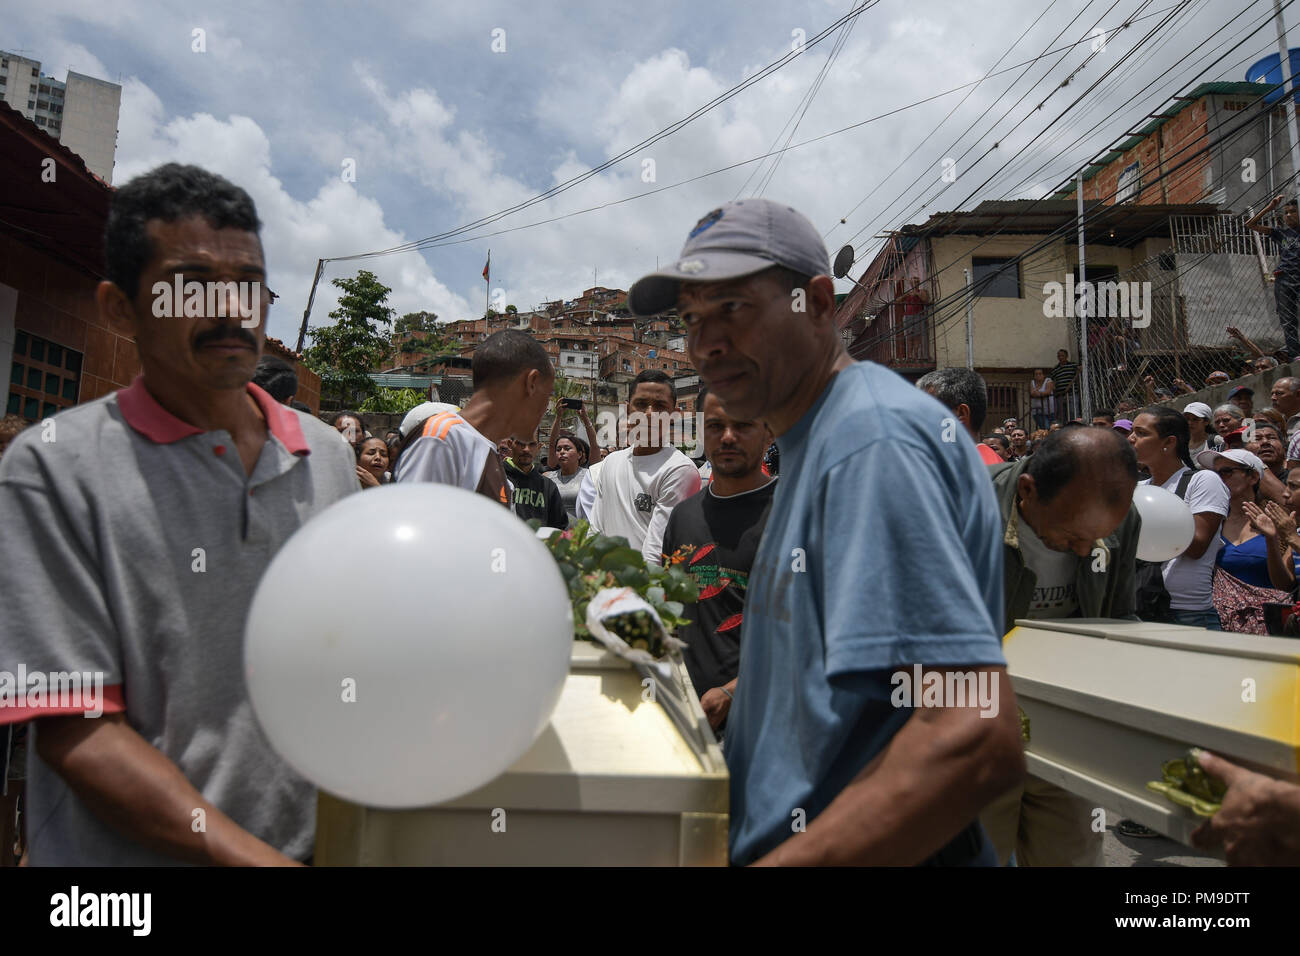 Caracas, Distrito Capital, Venezuela. 17th Sep, 2018. Relatives seen carrying the coffins of the victims during the funeral. The victims, Roxana Conde (10 years old), Julianyerli Conde (4 years old), JonÃ¡s Jonneiker Conde (1 year old) and Humberto Ruiz (10 years old), were murdered last September 14th in El 70 in Caracas, Venezuela. The perpetrator was identified as José Manuel Morgado (48 years old) who was killed the same night after a shootout with police officers (CICPC) while fleeing in Ocumare del Tuy, Miranda state, Venezuela. The suspect raped the children before killing them Stock Photo